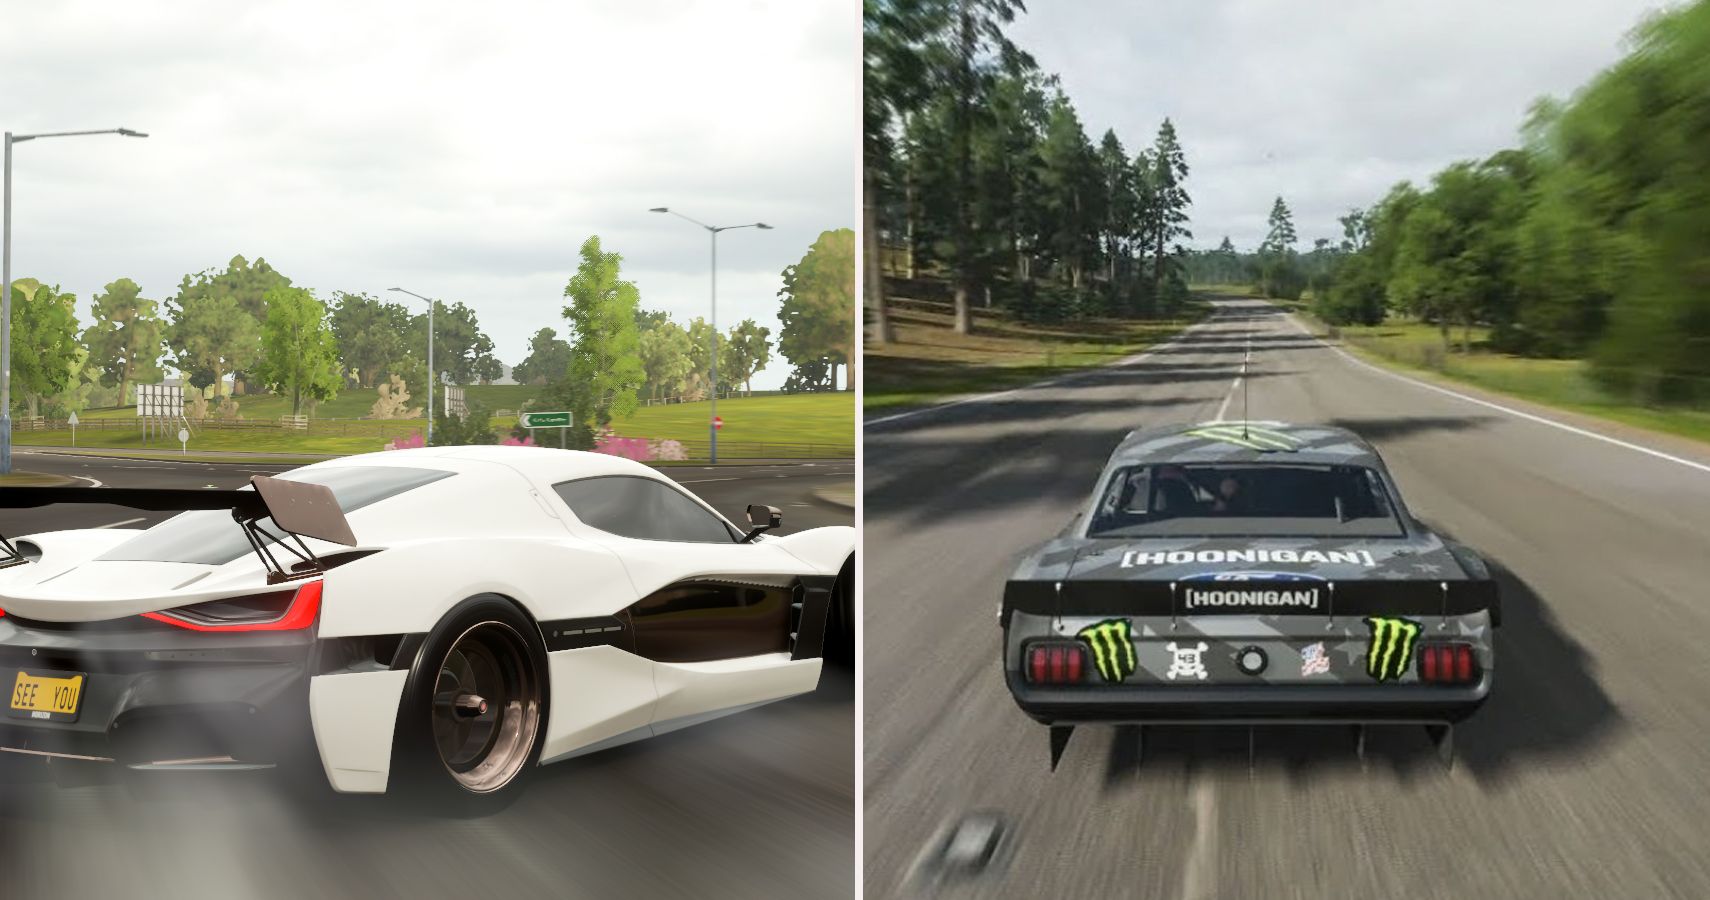 The 10 Fastest Cars In Forza Horizon 4 (& How Fast They Can Go